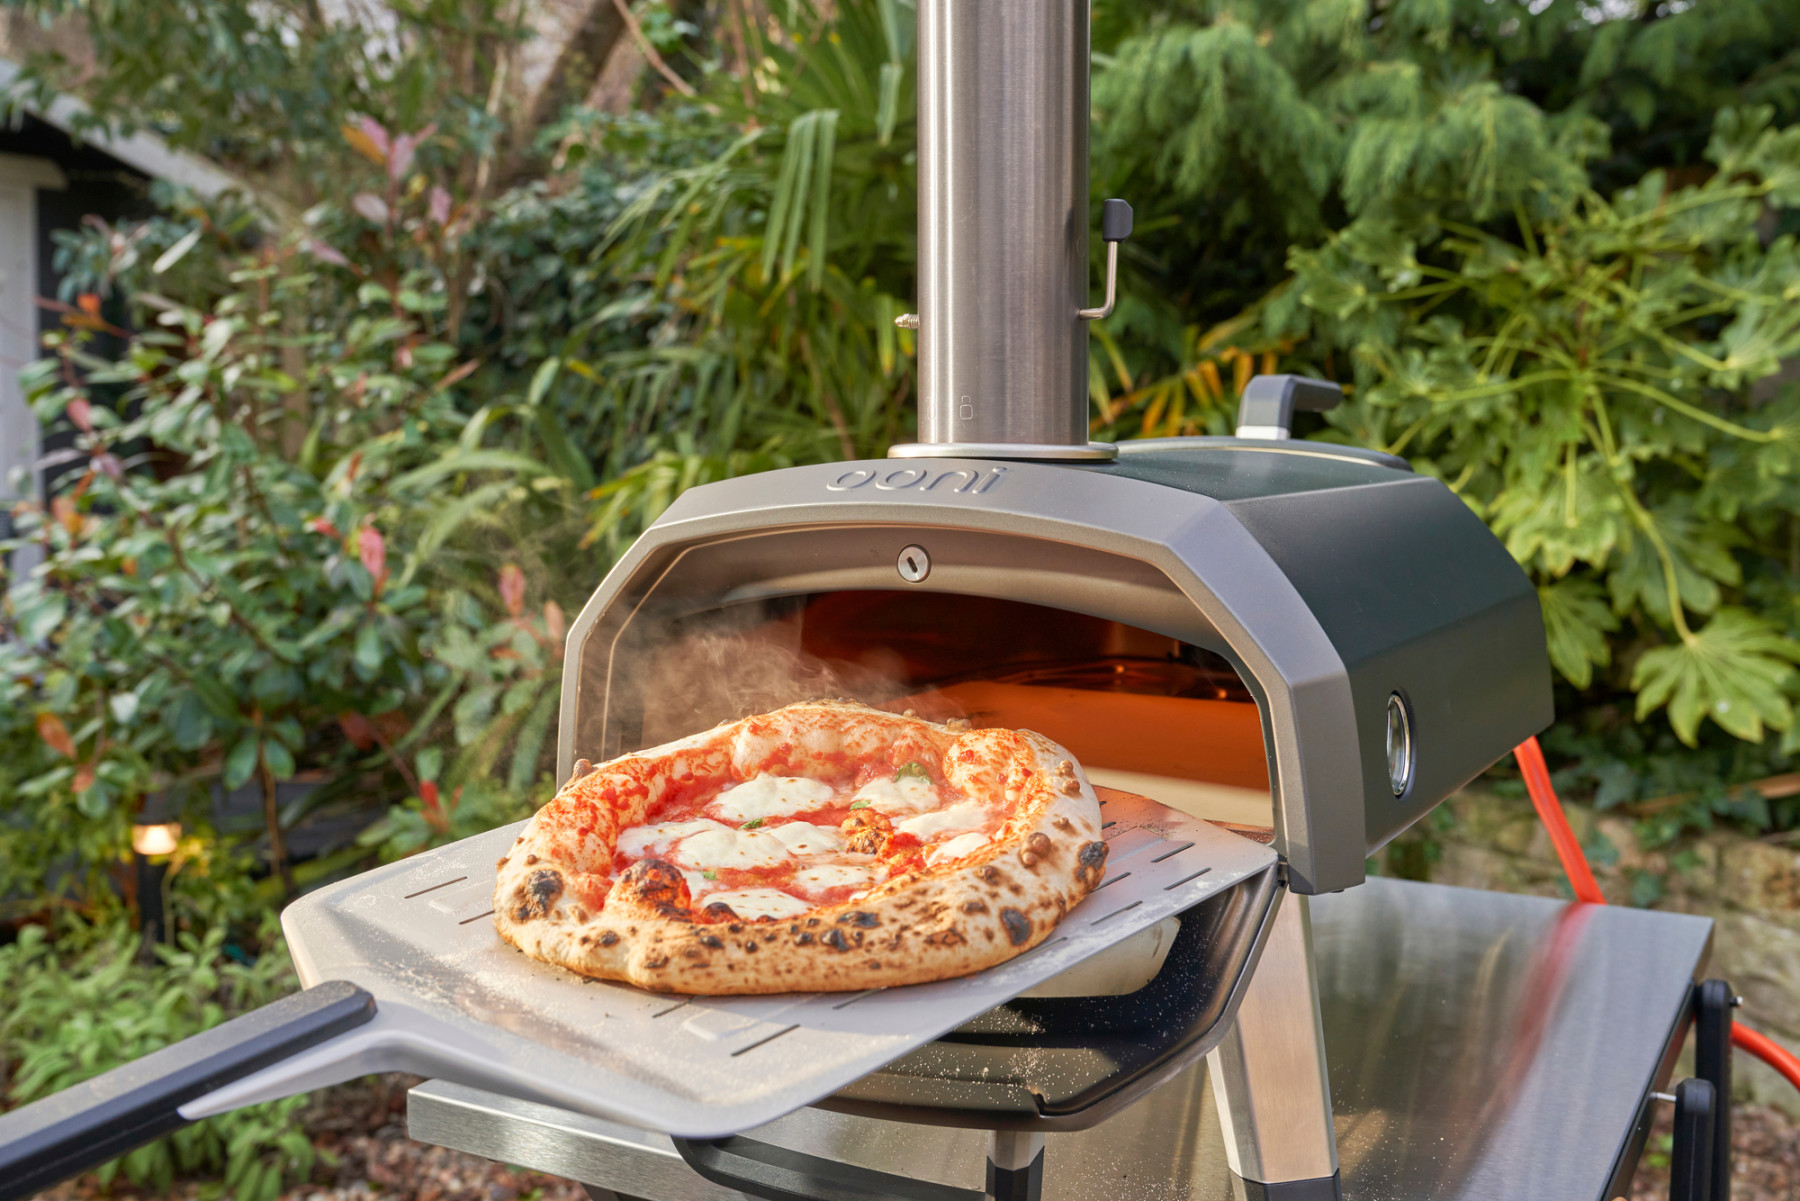 The Ooni Karu 12 Pizza Oven Is $100 Off for Labor Day